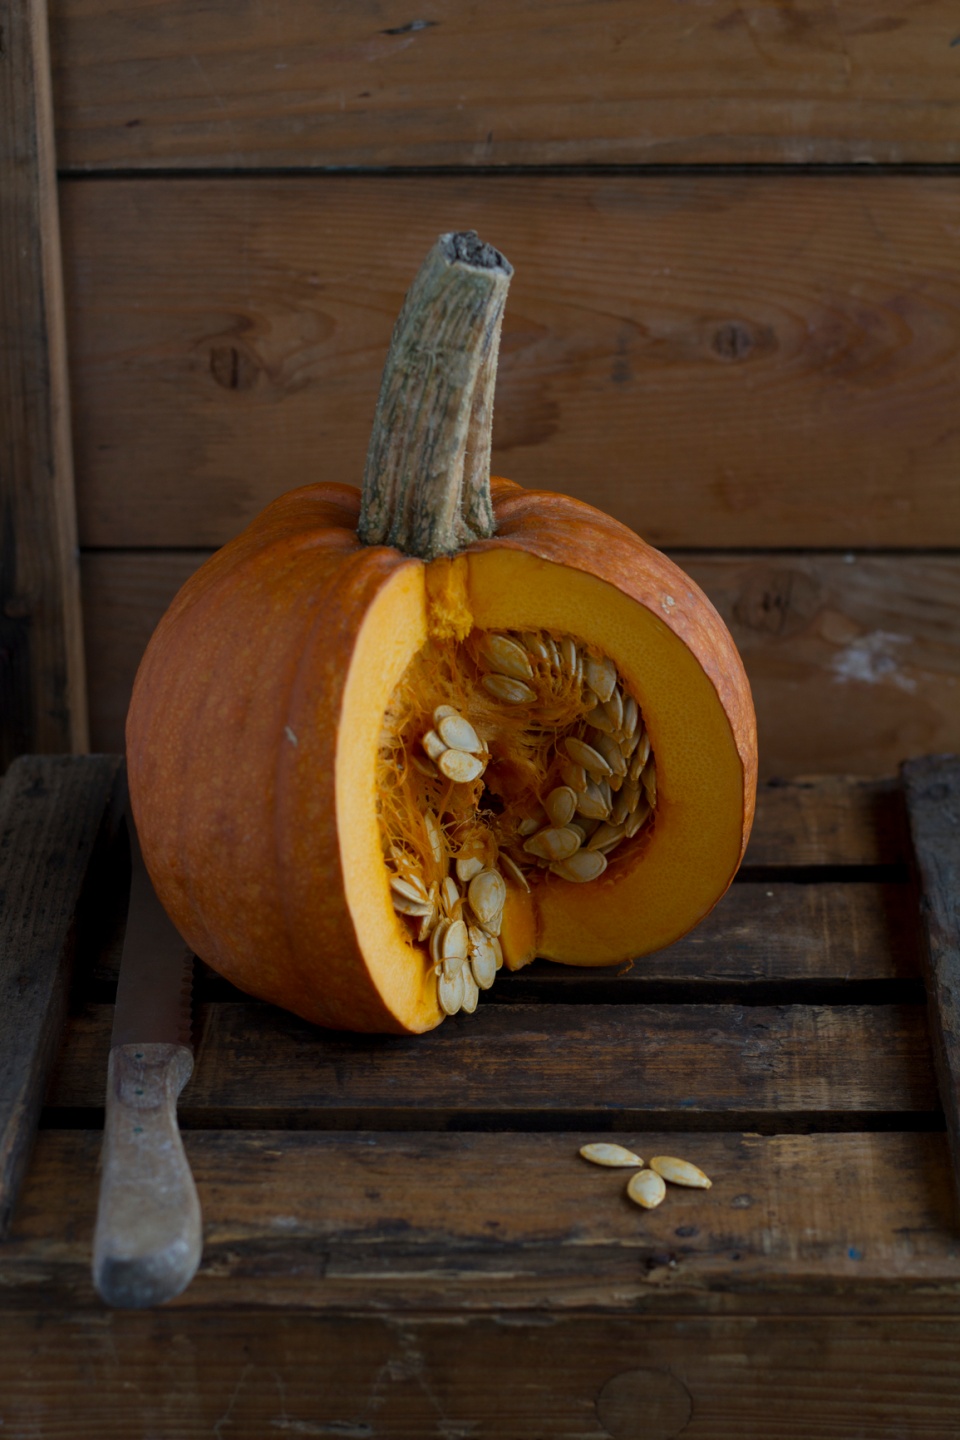 DIY Planting pumpkin seeds is culinary upcycling The joy